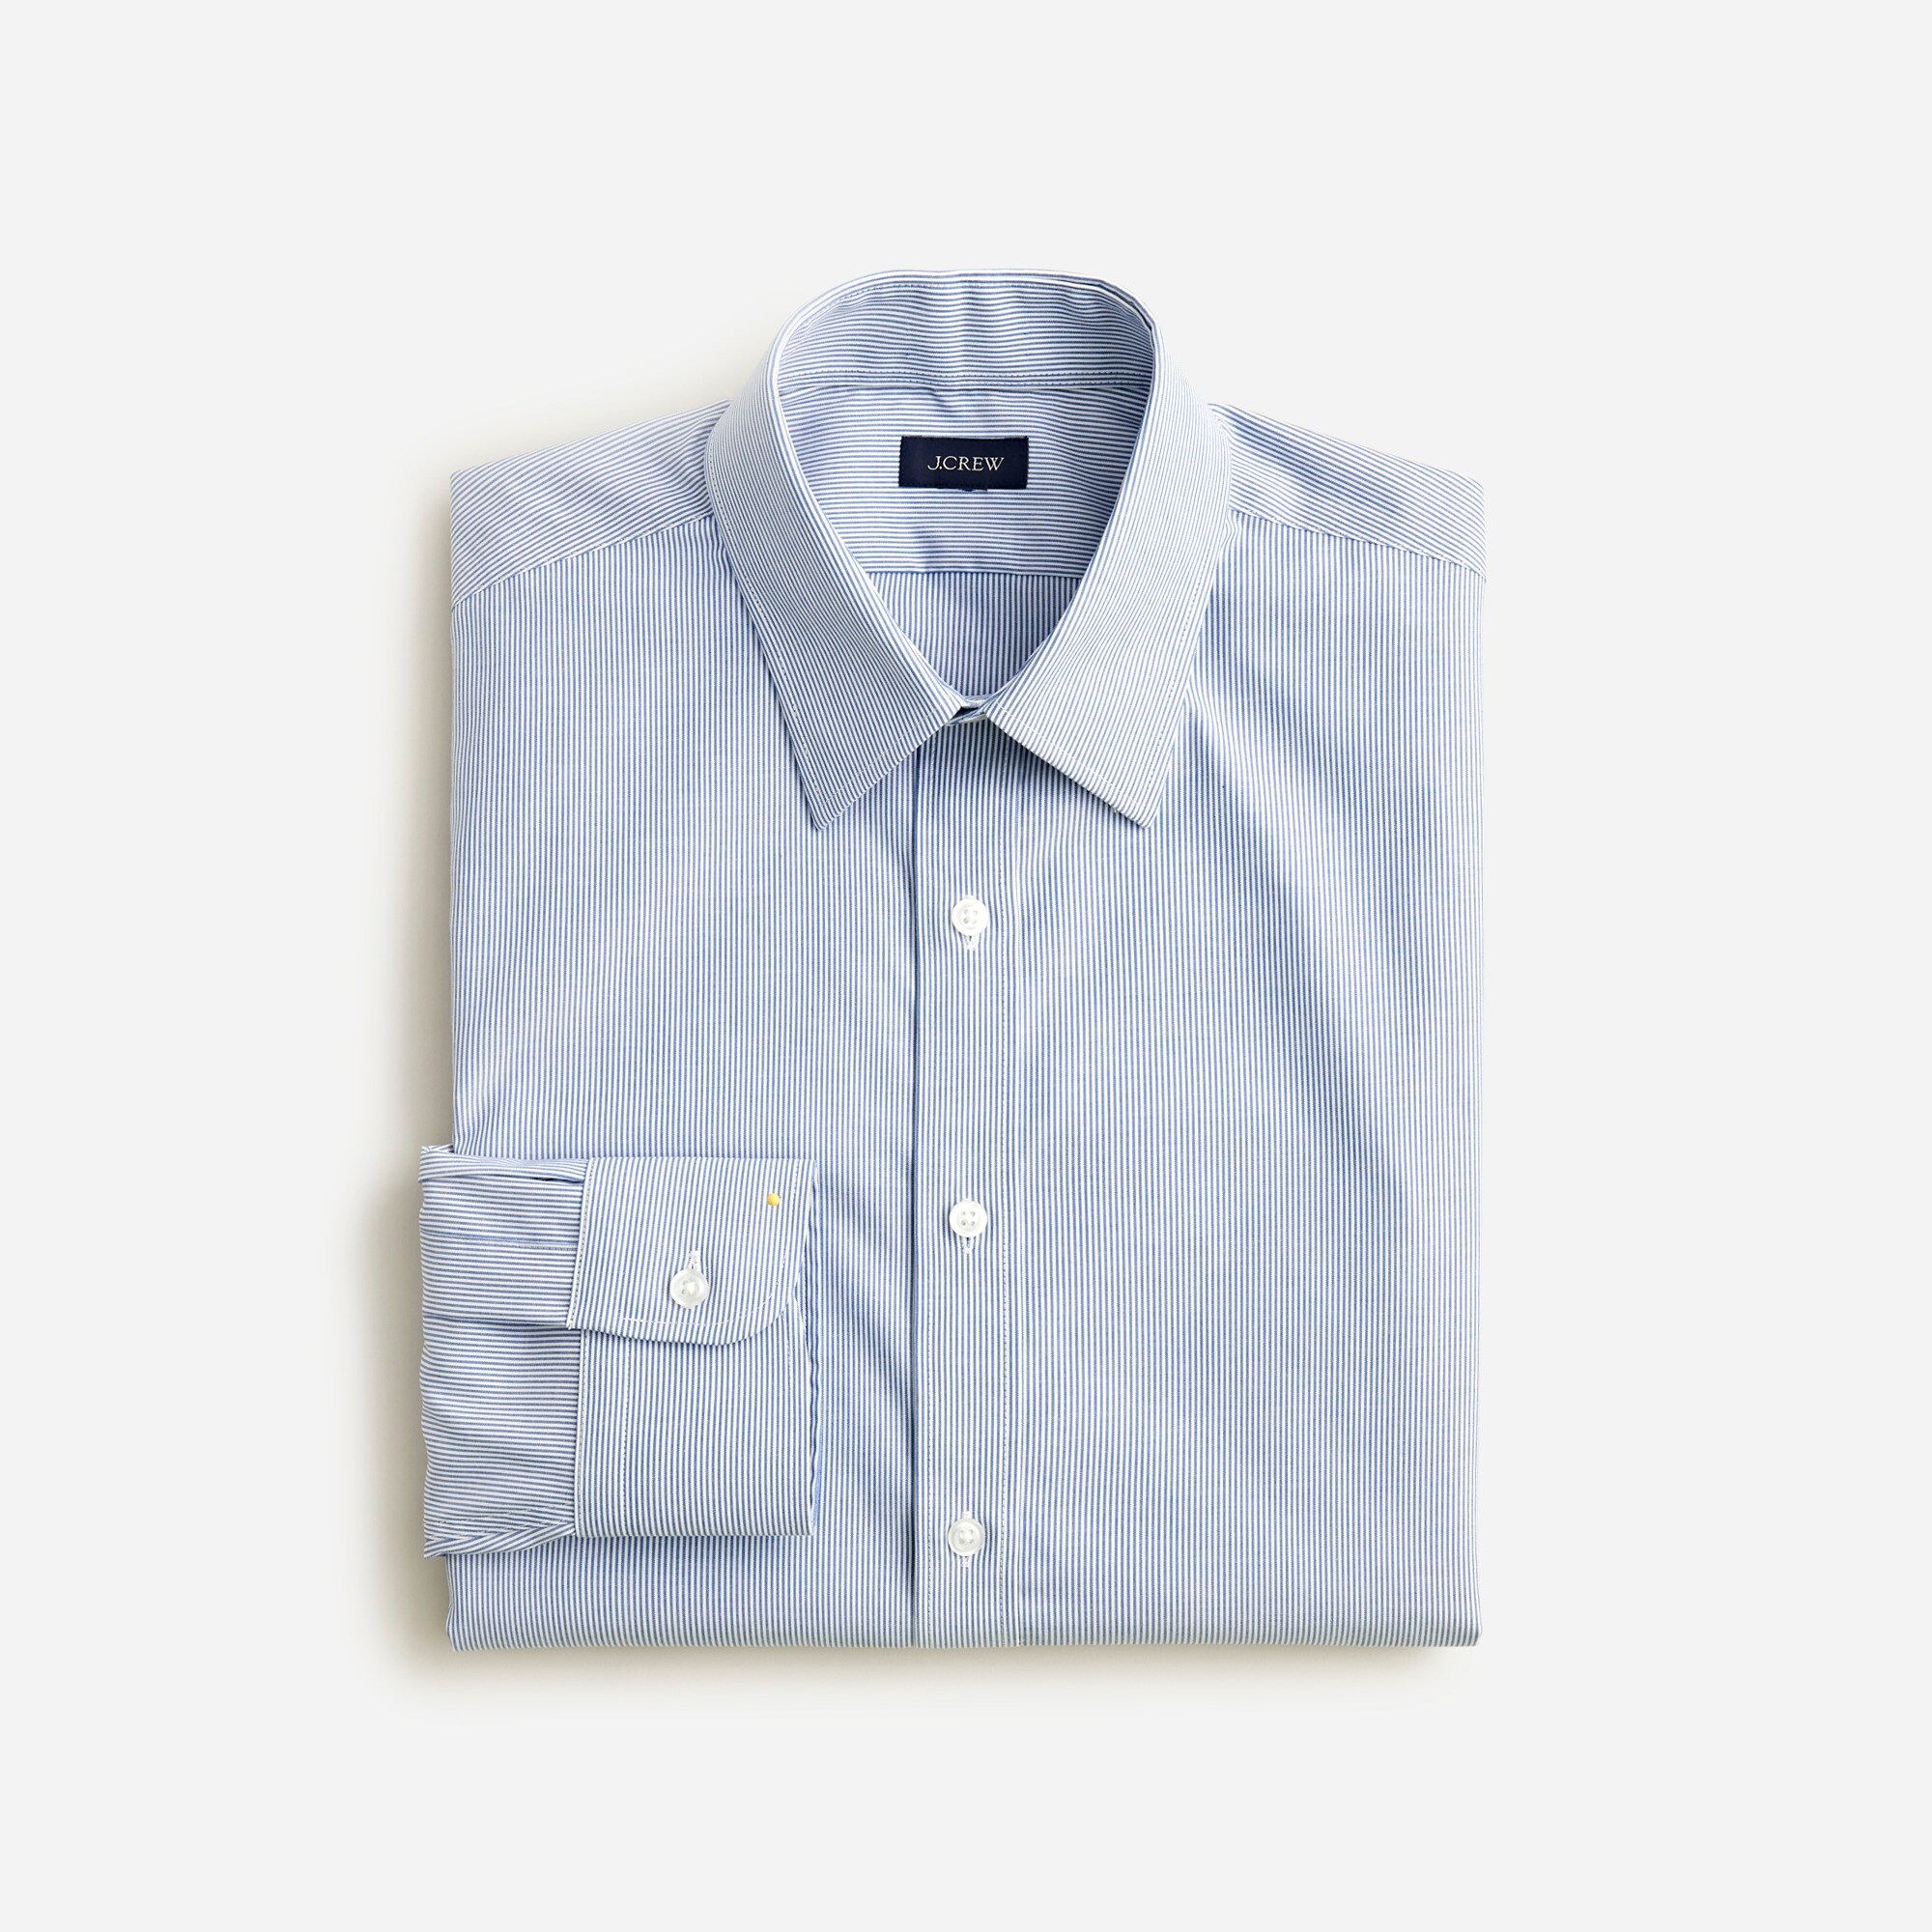  Bowery wrinkle-free dress shirt with point collar